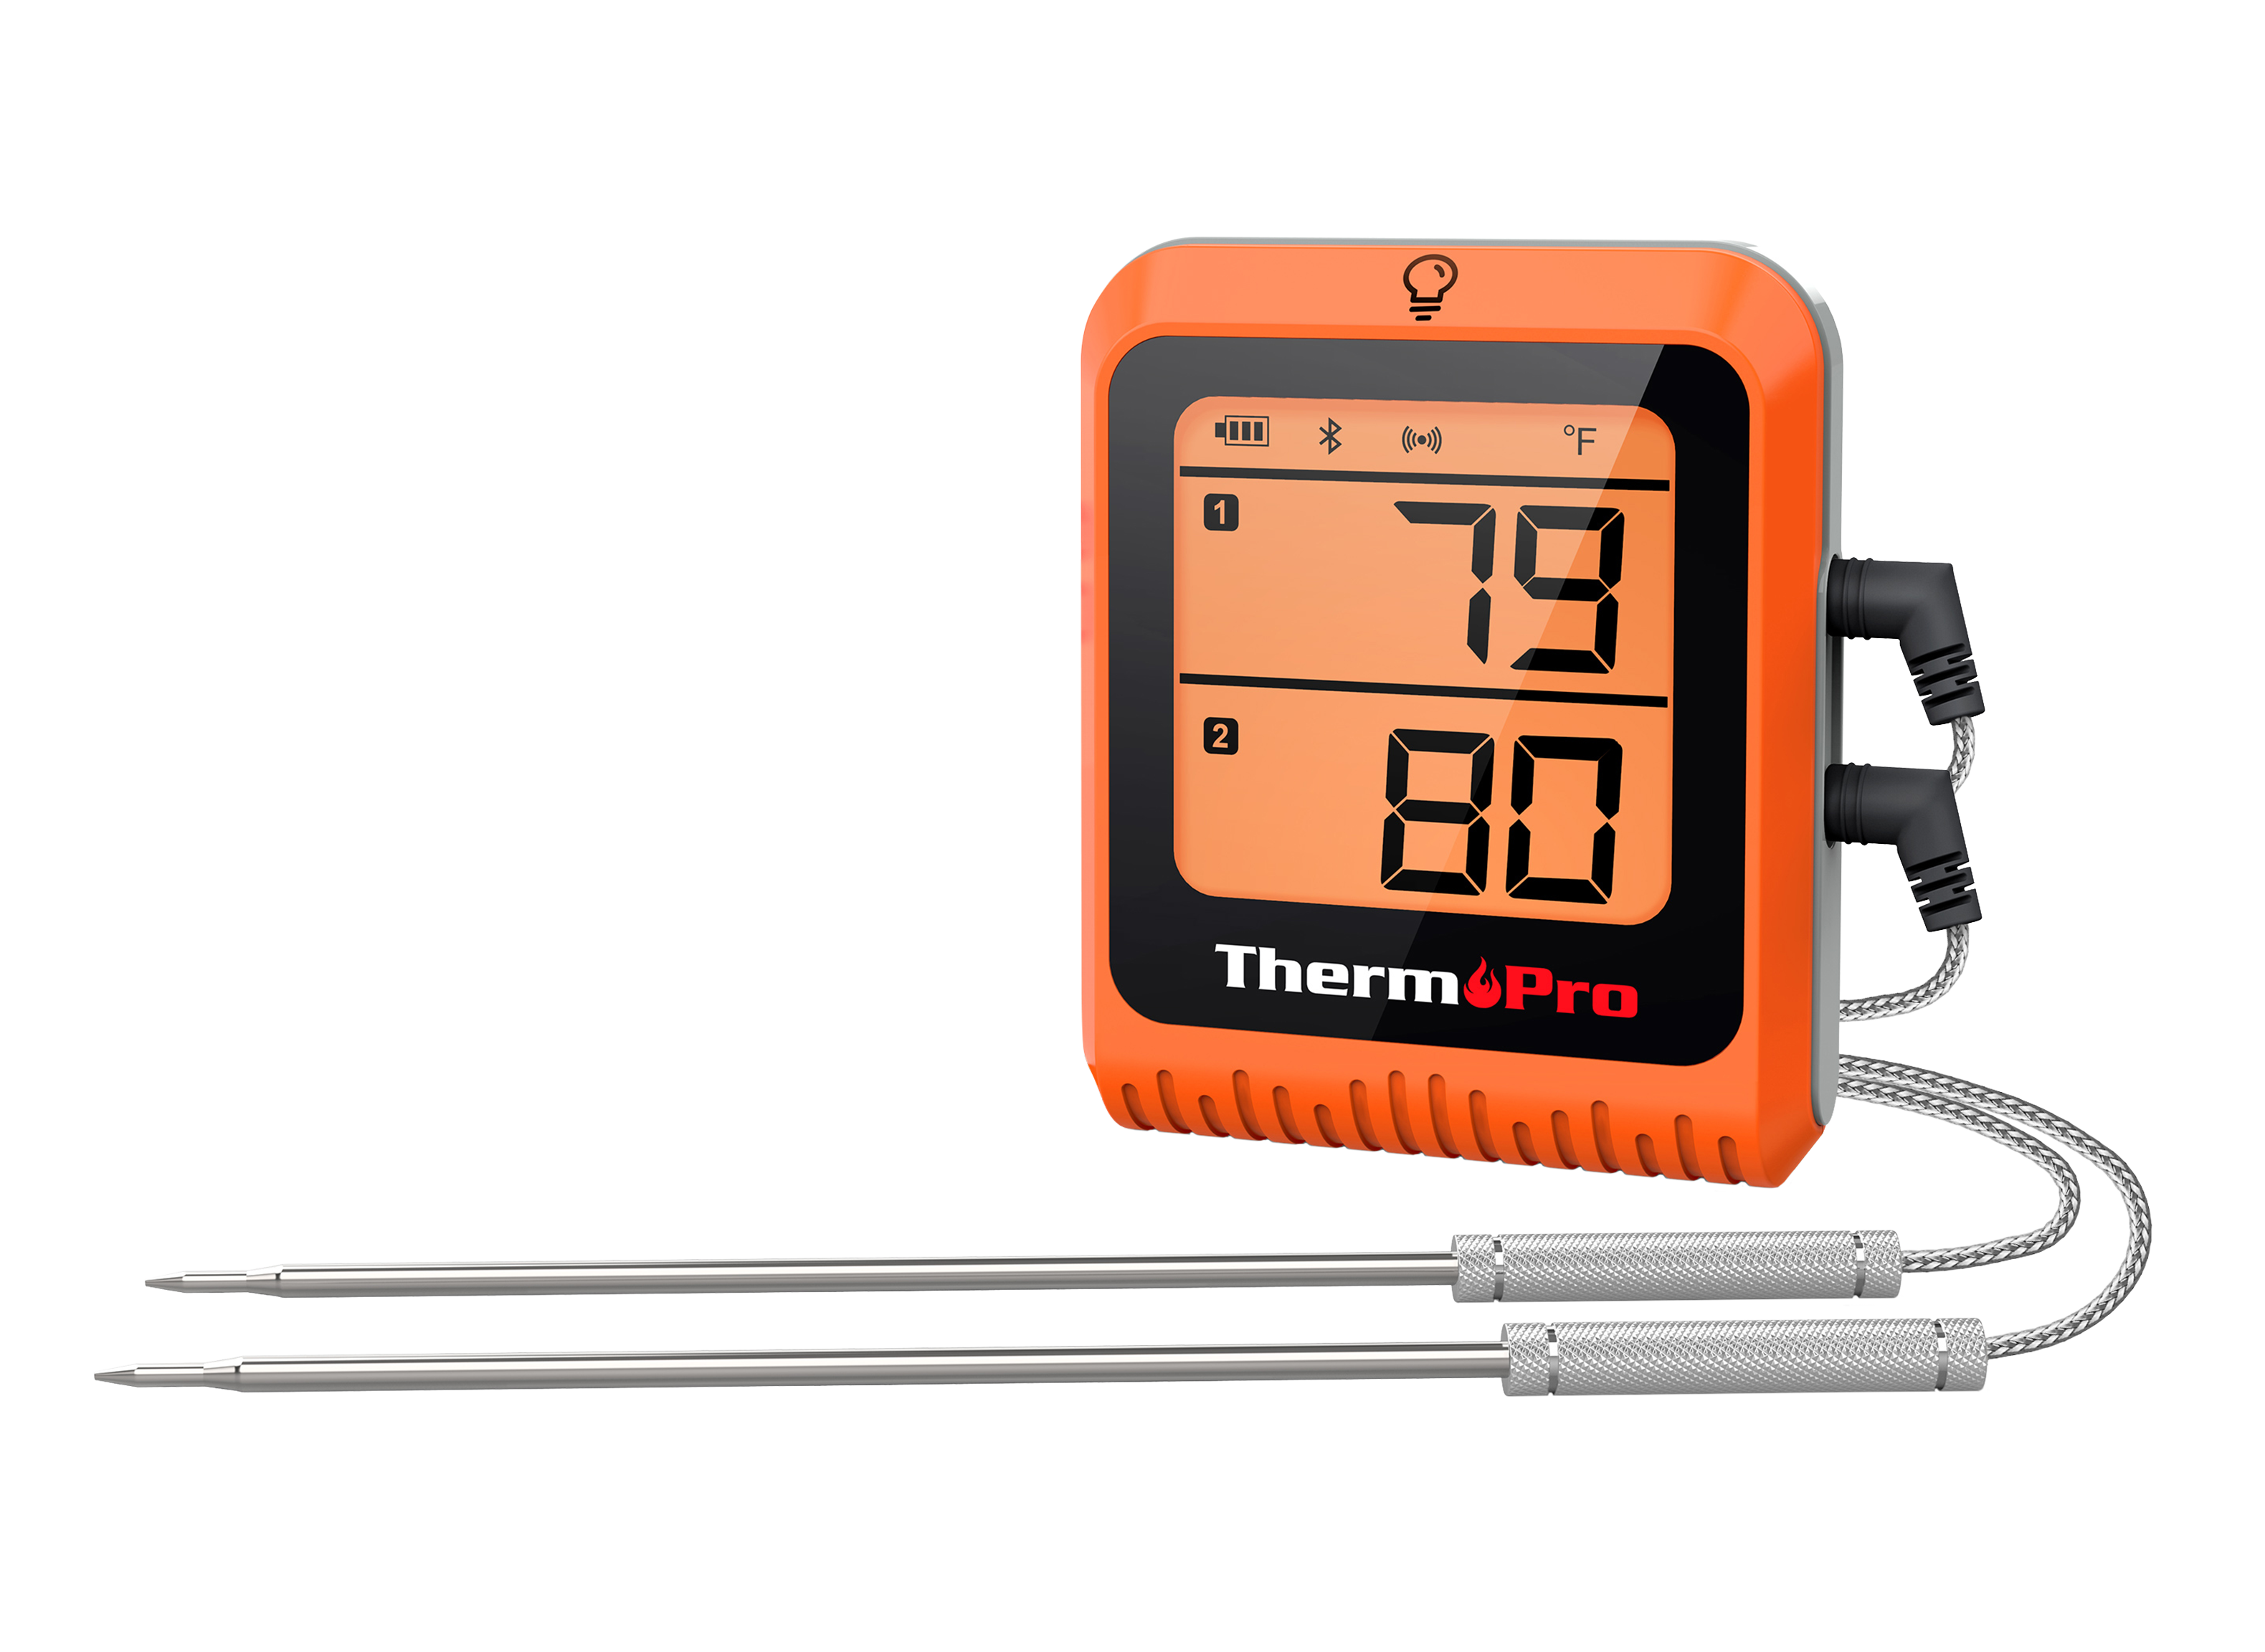 https://crdms.images.consumerreports.org/prod/products/cr/models/406077-leave-in-digital-thermopro-smart-bt-meat-thermometer-tp920-10028740.png